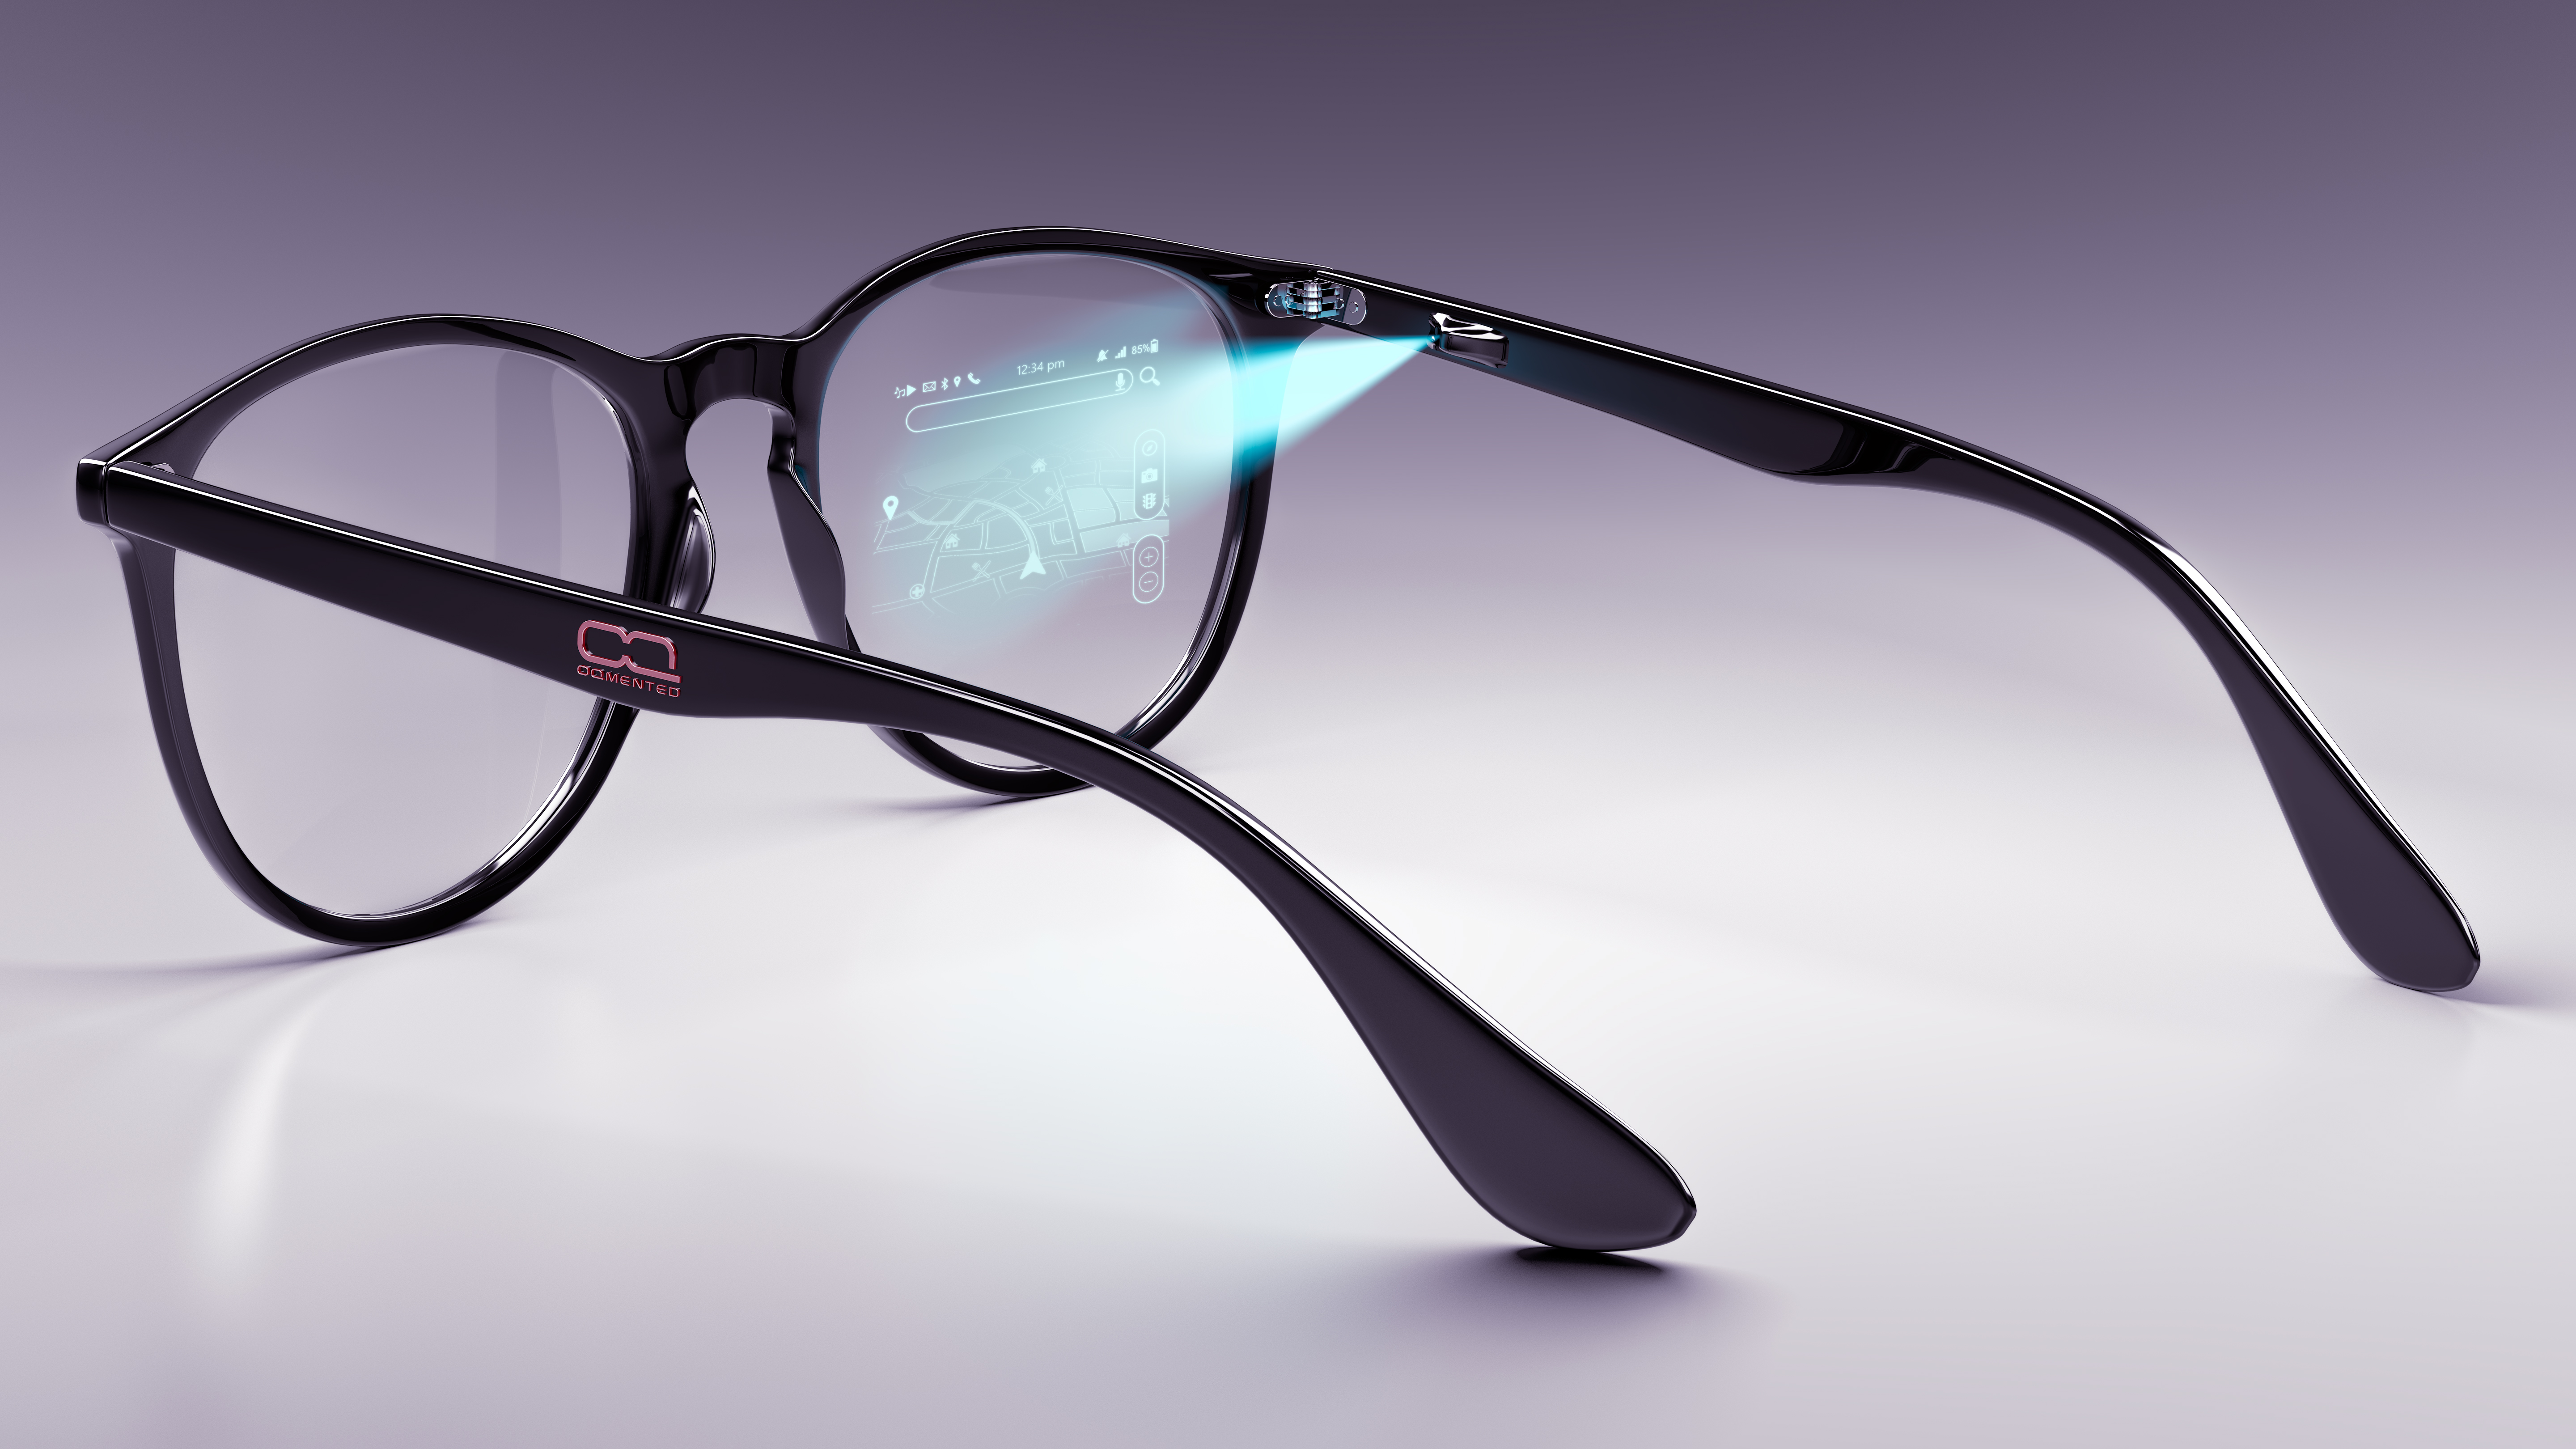 Augmented Reality Glasses with Projection